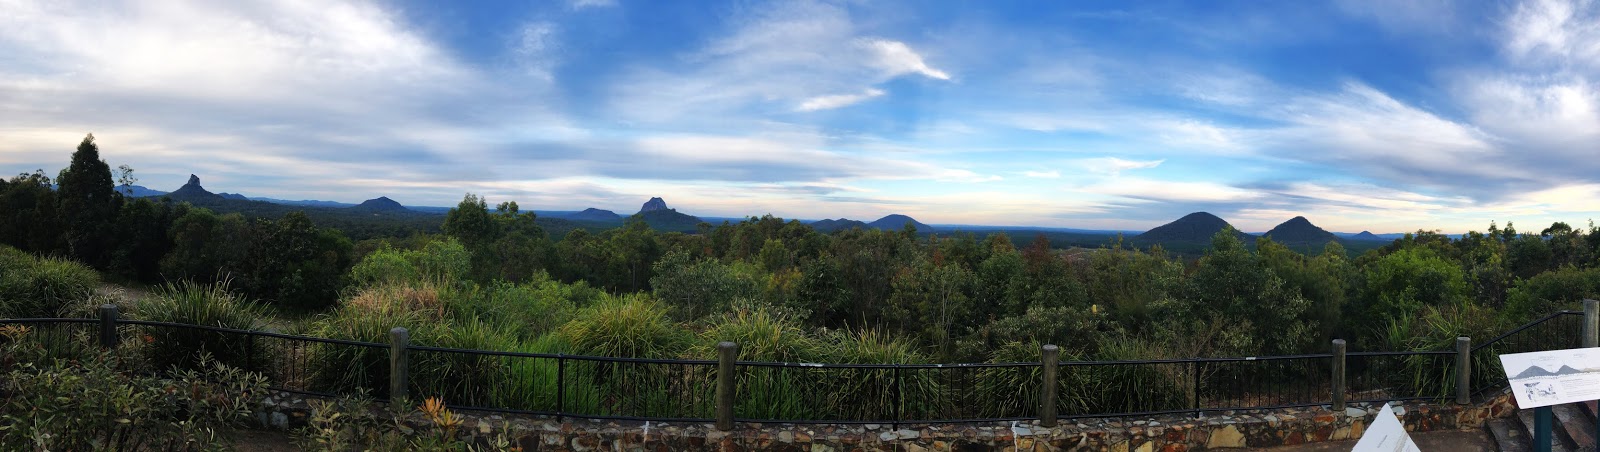 Glass House Mountains lookout